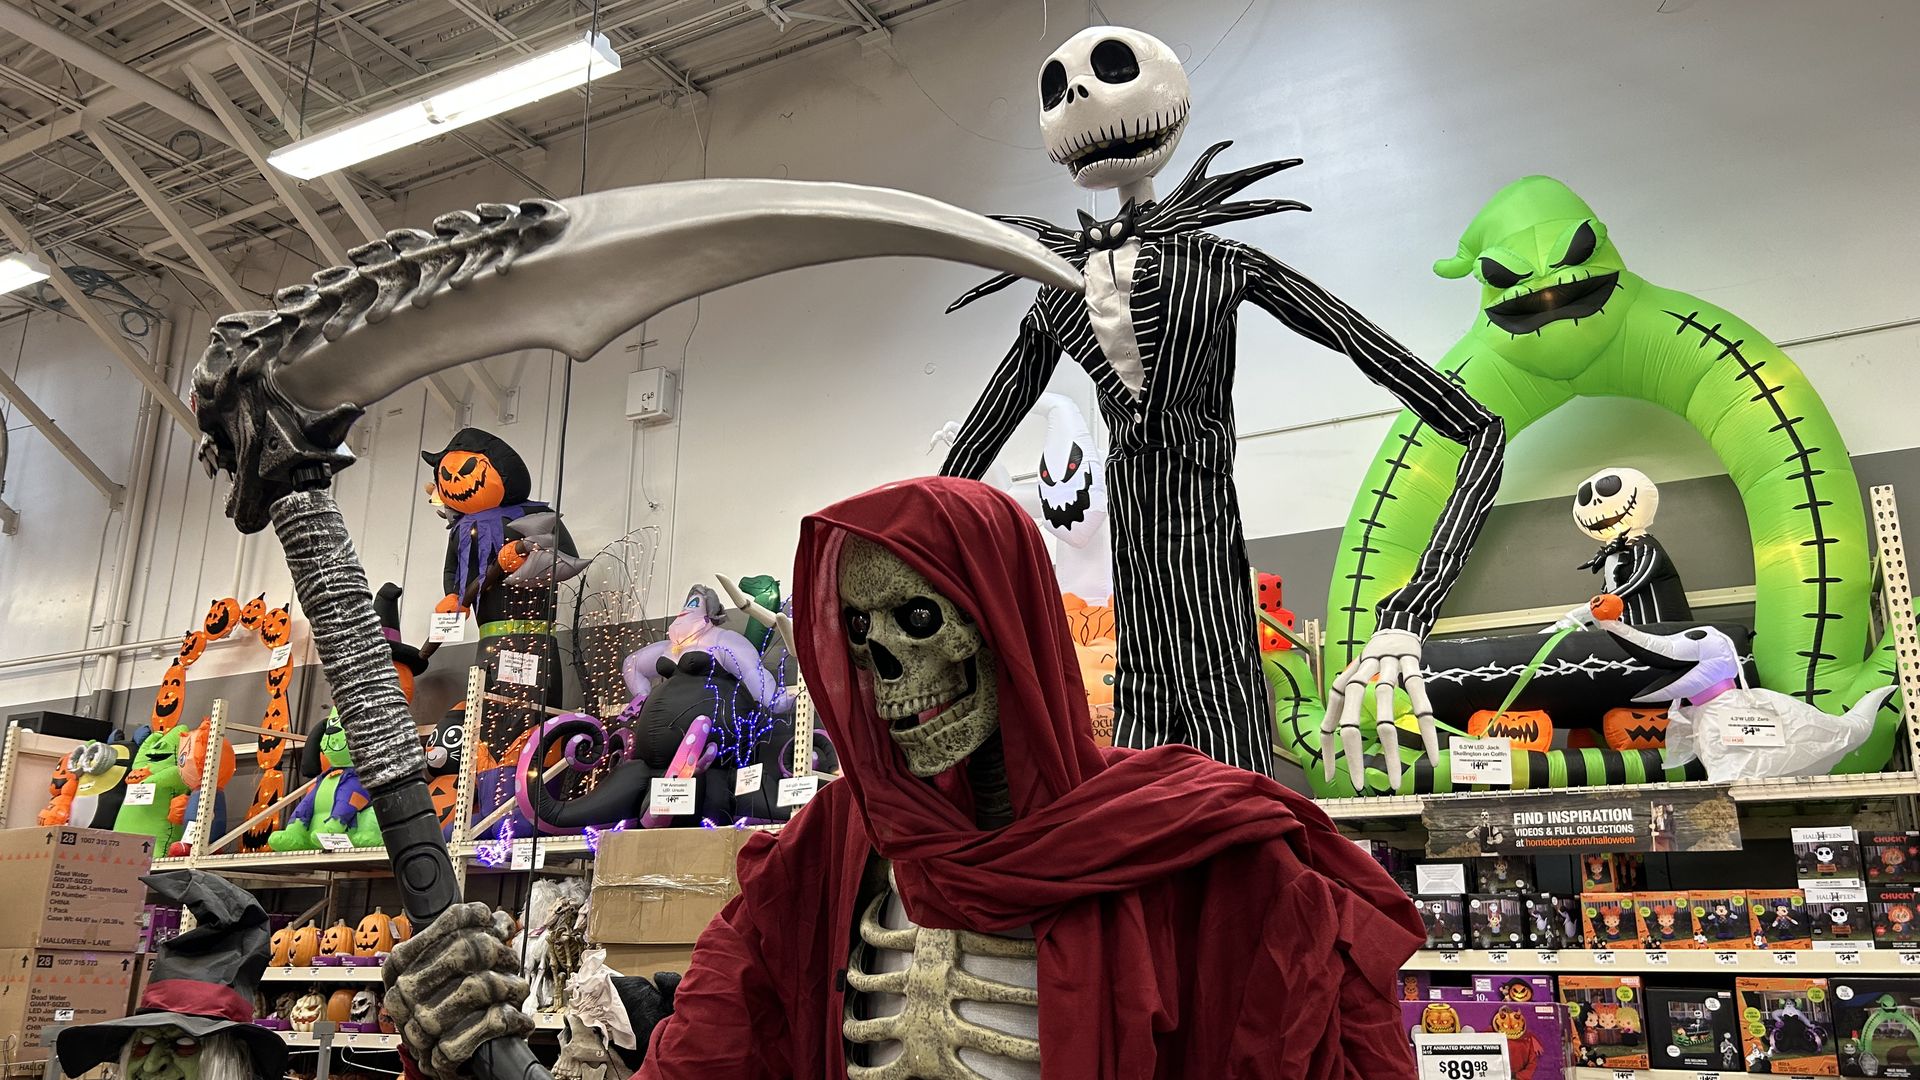 A floor display at Home Depot of Halloween decorations, including a Grim Reaper skeleton and a tall character from nightmare before Christmas